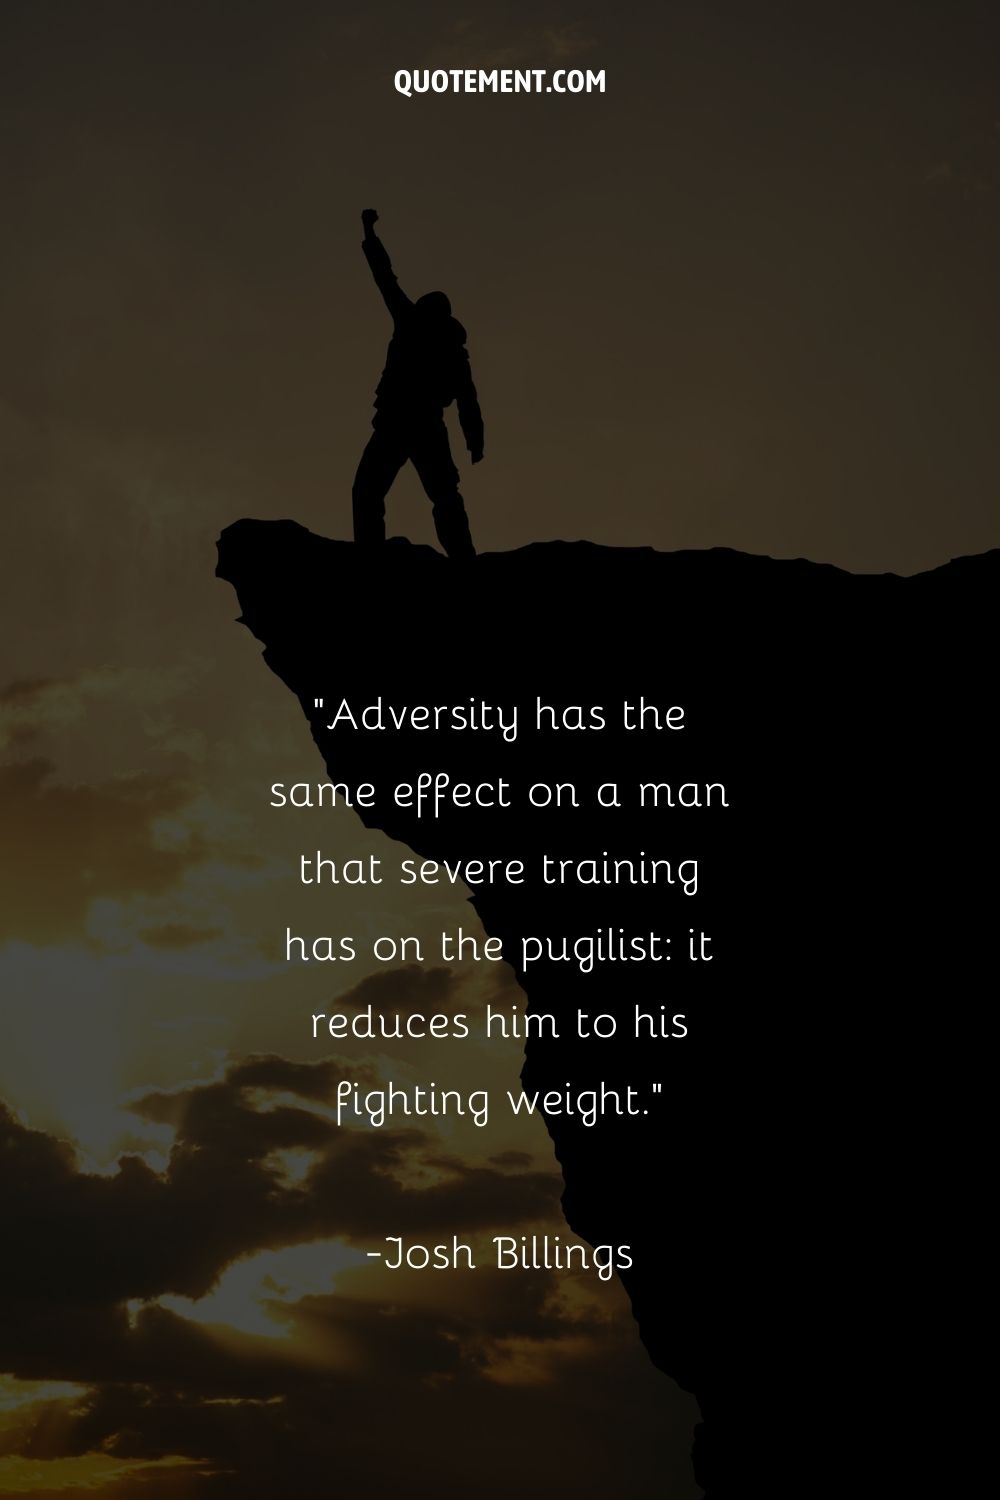 Adversity has the same effect on a man that severe training has on the pugilis